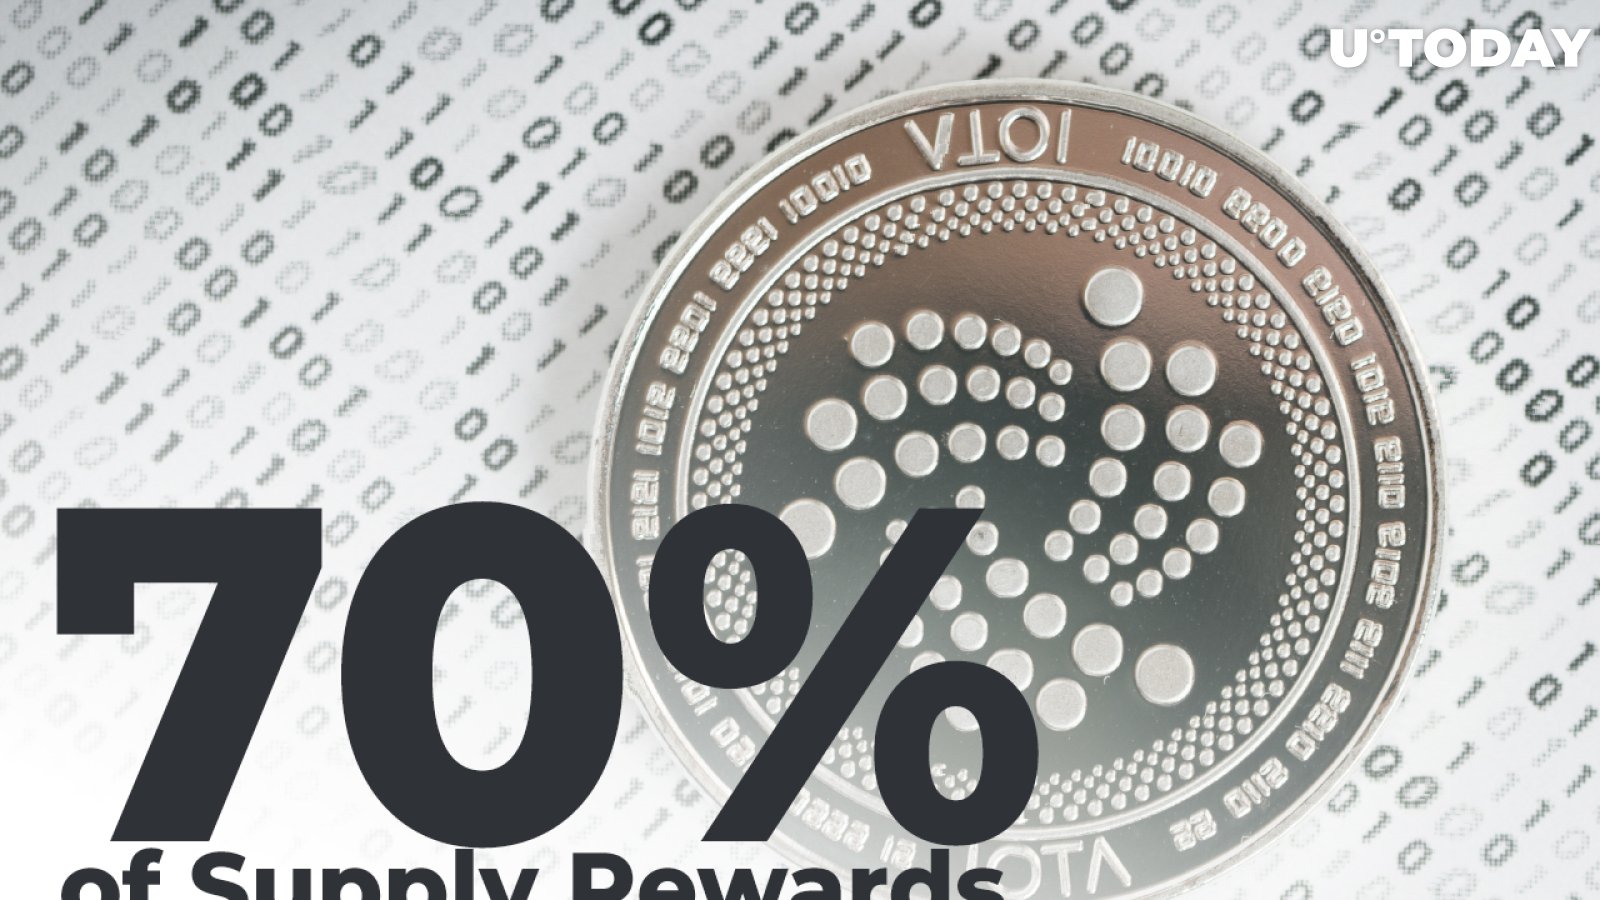 IOTA Announcing 70% of Supply Rewards Prior to Launch of Assembly Layer 1 Network